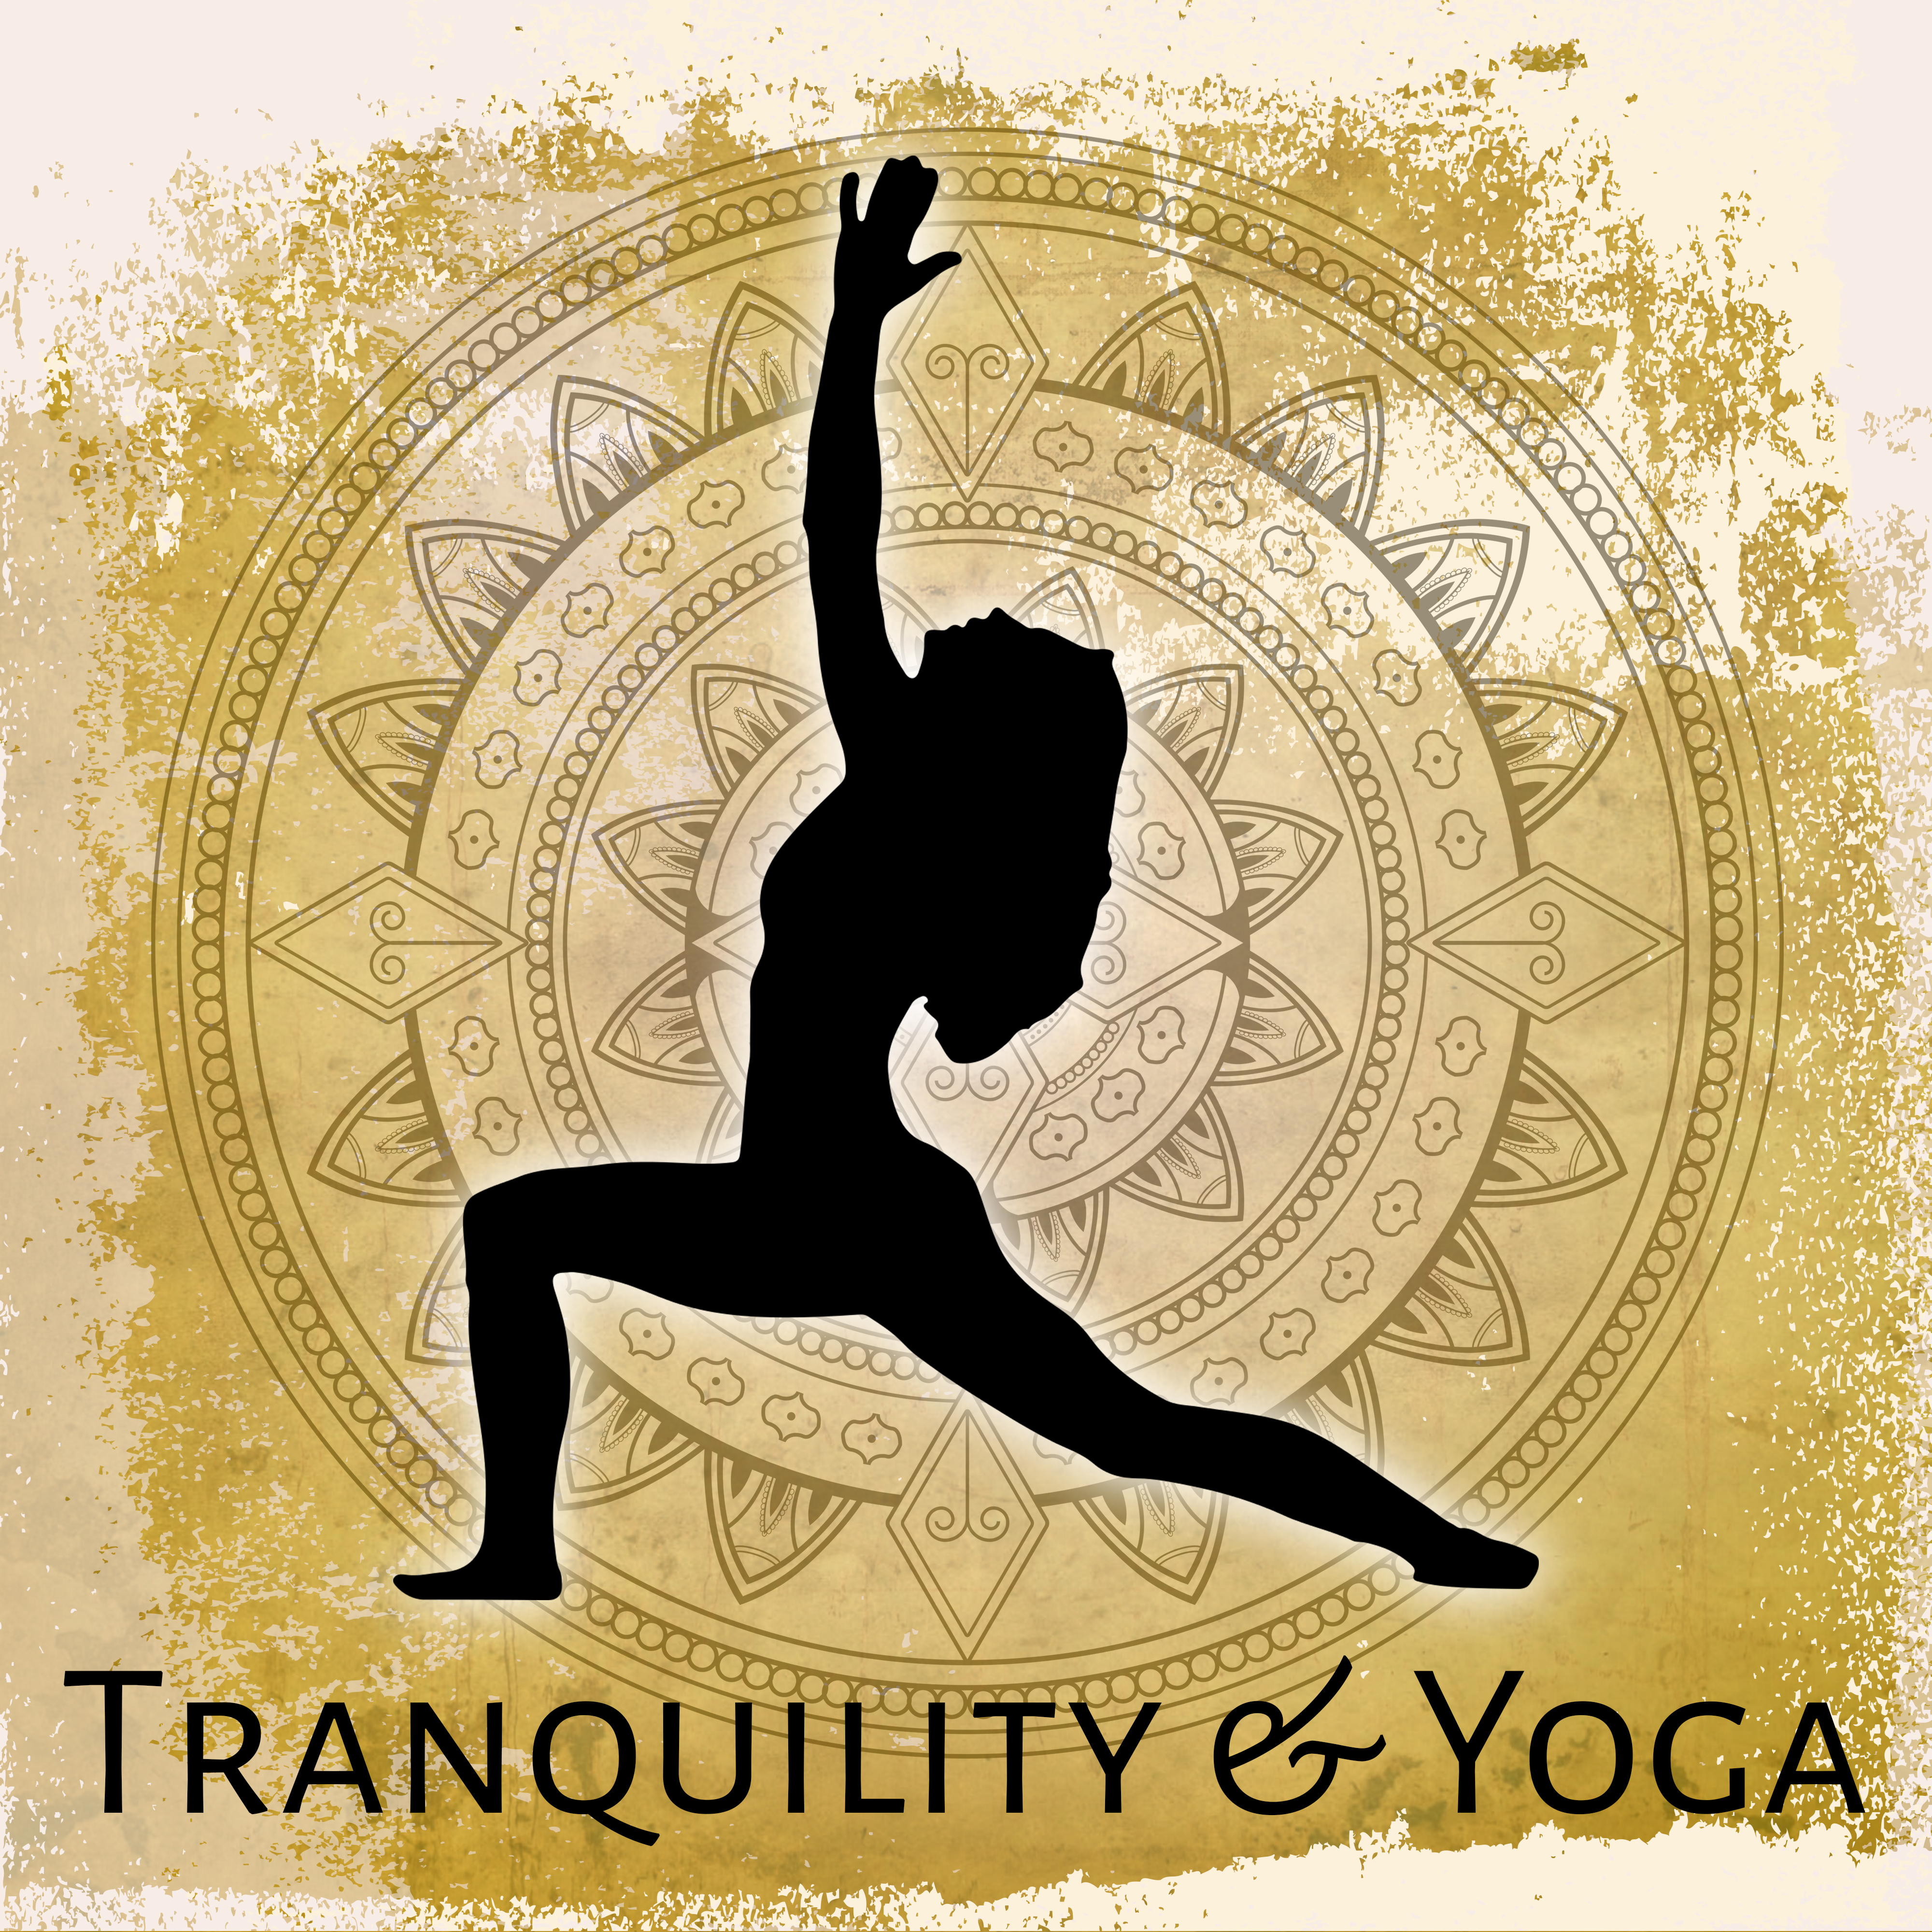 Tranquility & Yoga – Meditation Music, Train Your Mind, Tibetan Sounds, Restful Zen Music, Soothing Water, Deep Focus